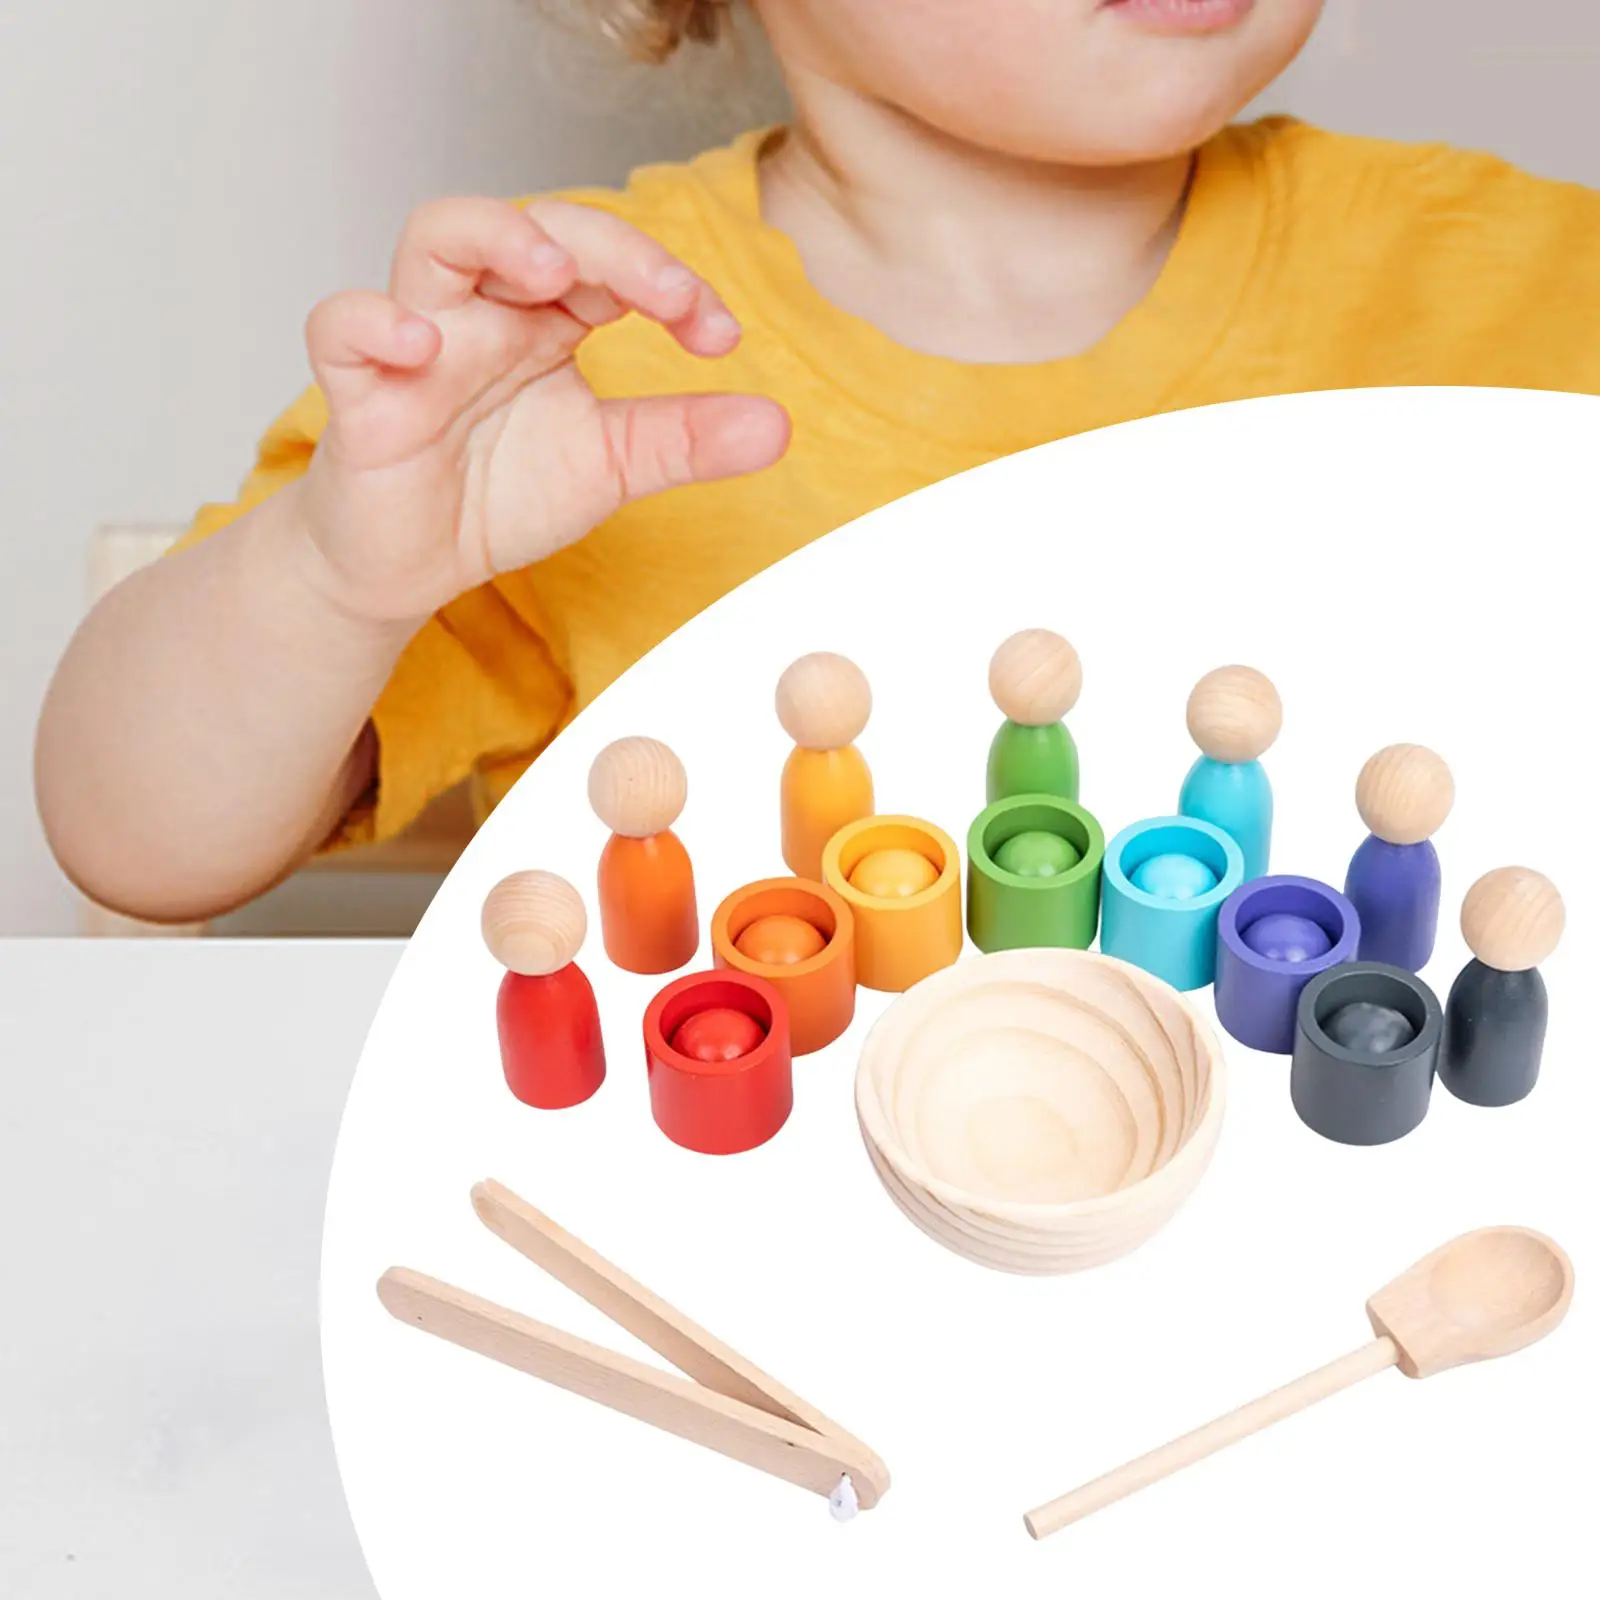 Wooden Balls in Cups Montessori 7 color Fine Motor Color Sorting and Counting with Cups and Balls Preschool Sensory Toys